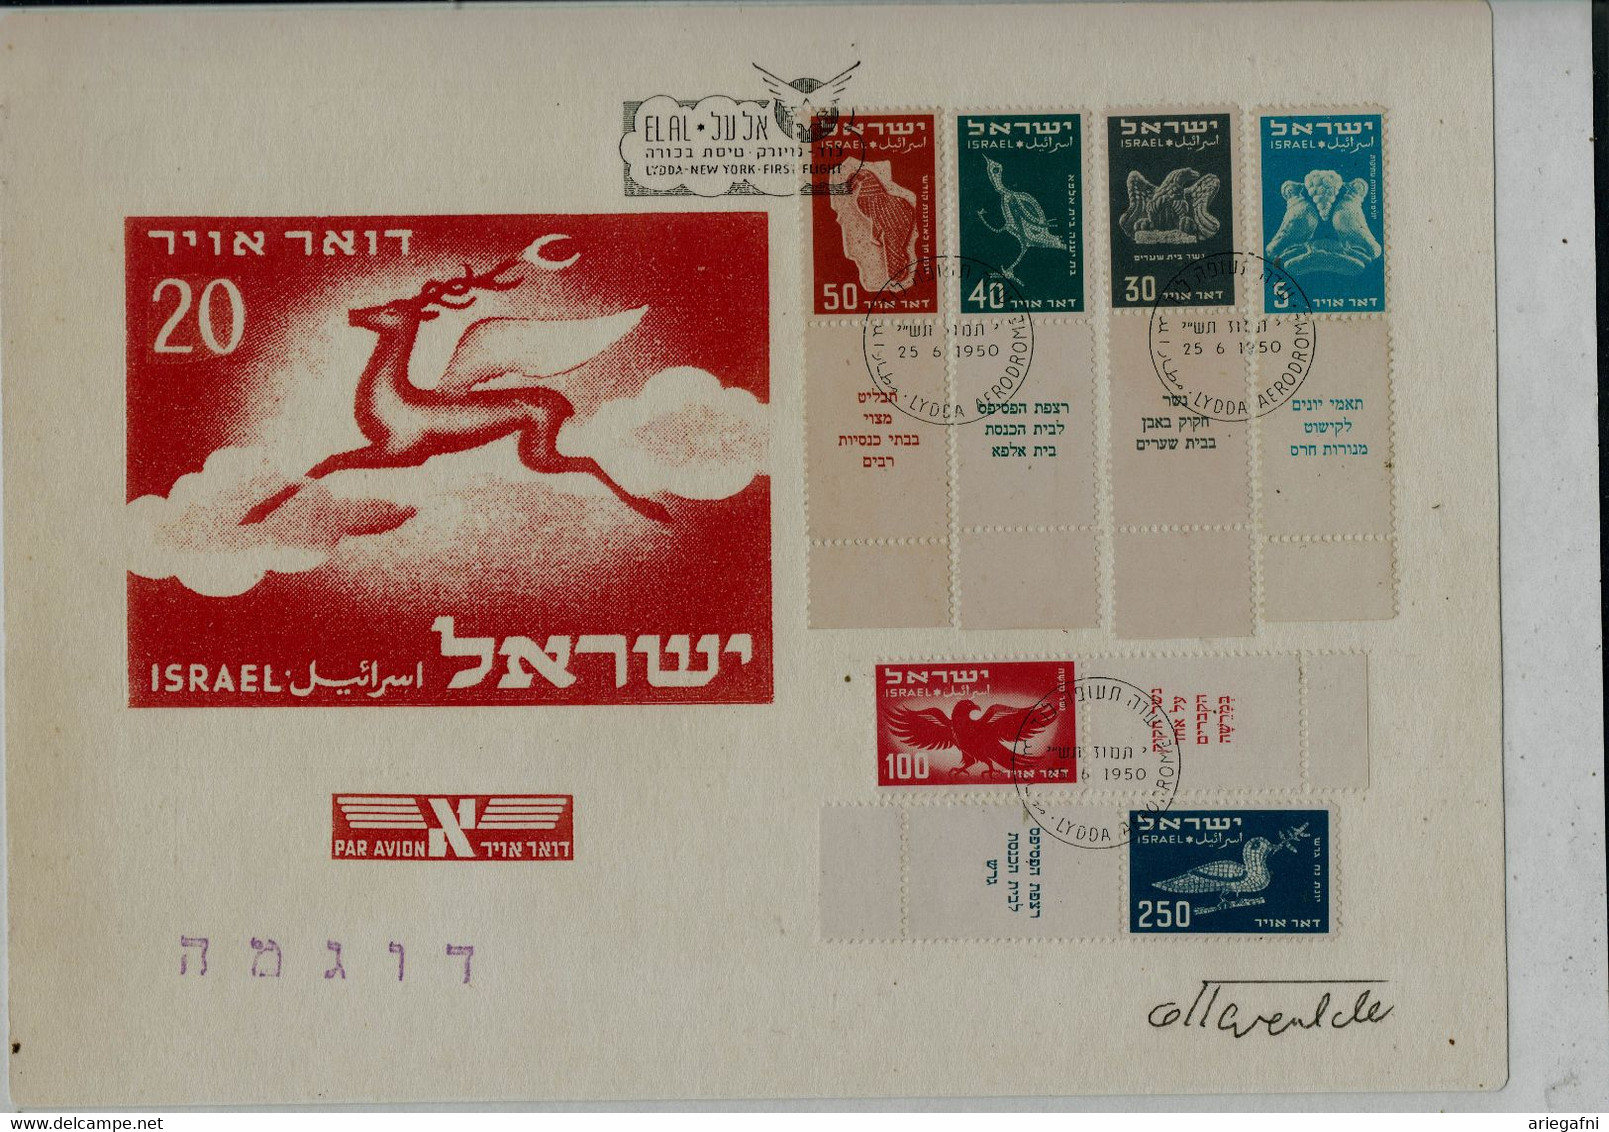 ISRAEL  1950 AIRLETTERS FDC WITH STAMP AIR MAIL FULL TABS PROOF ( SPECIMEN) VERY RARE!! - Imperforates, Proofs & Errors